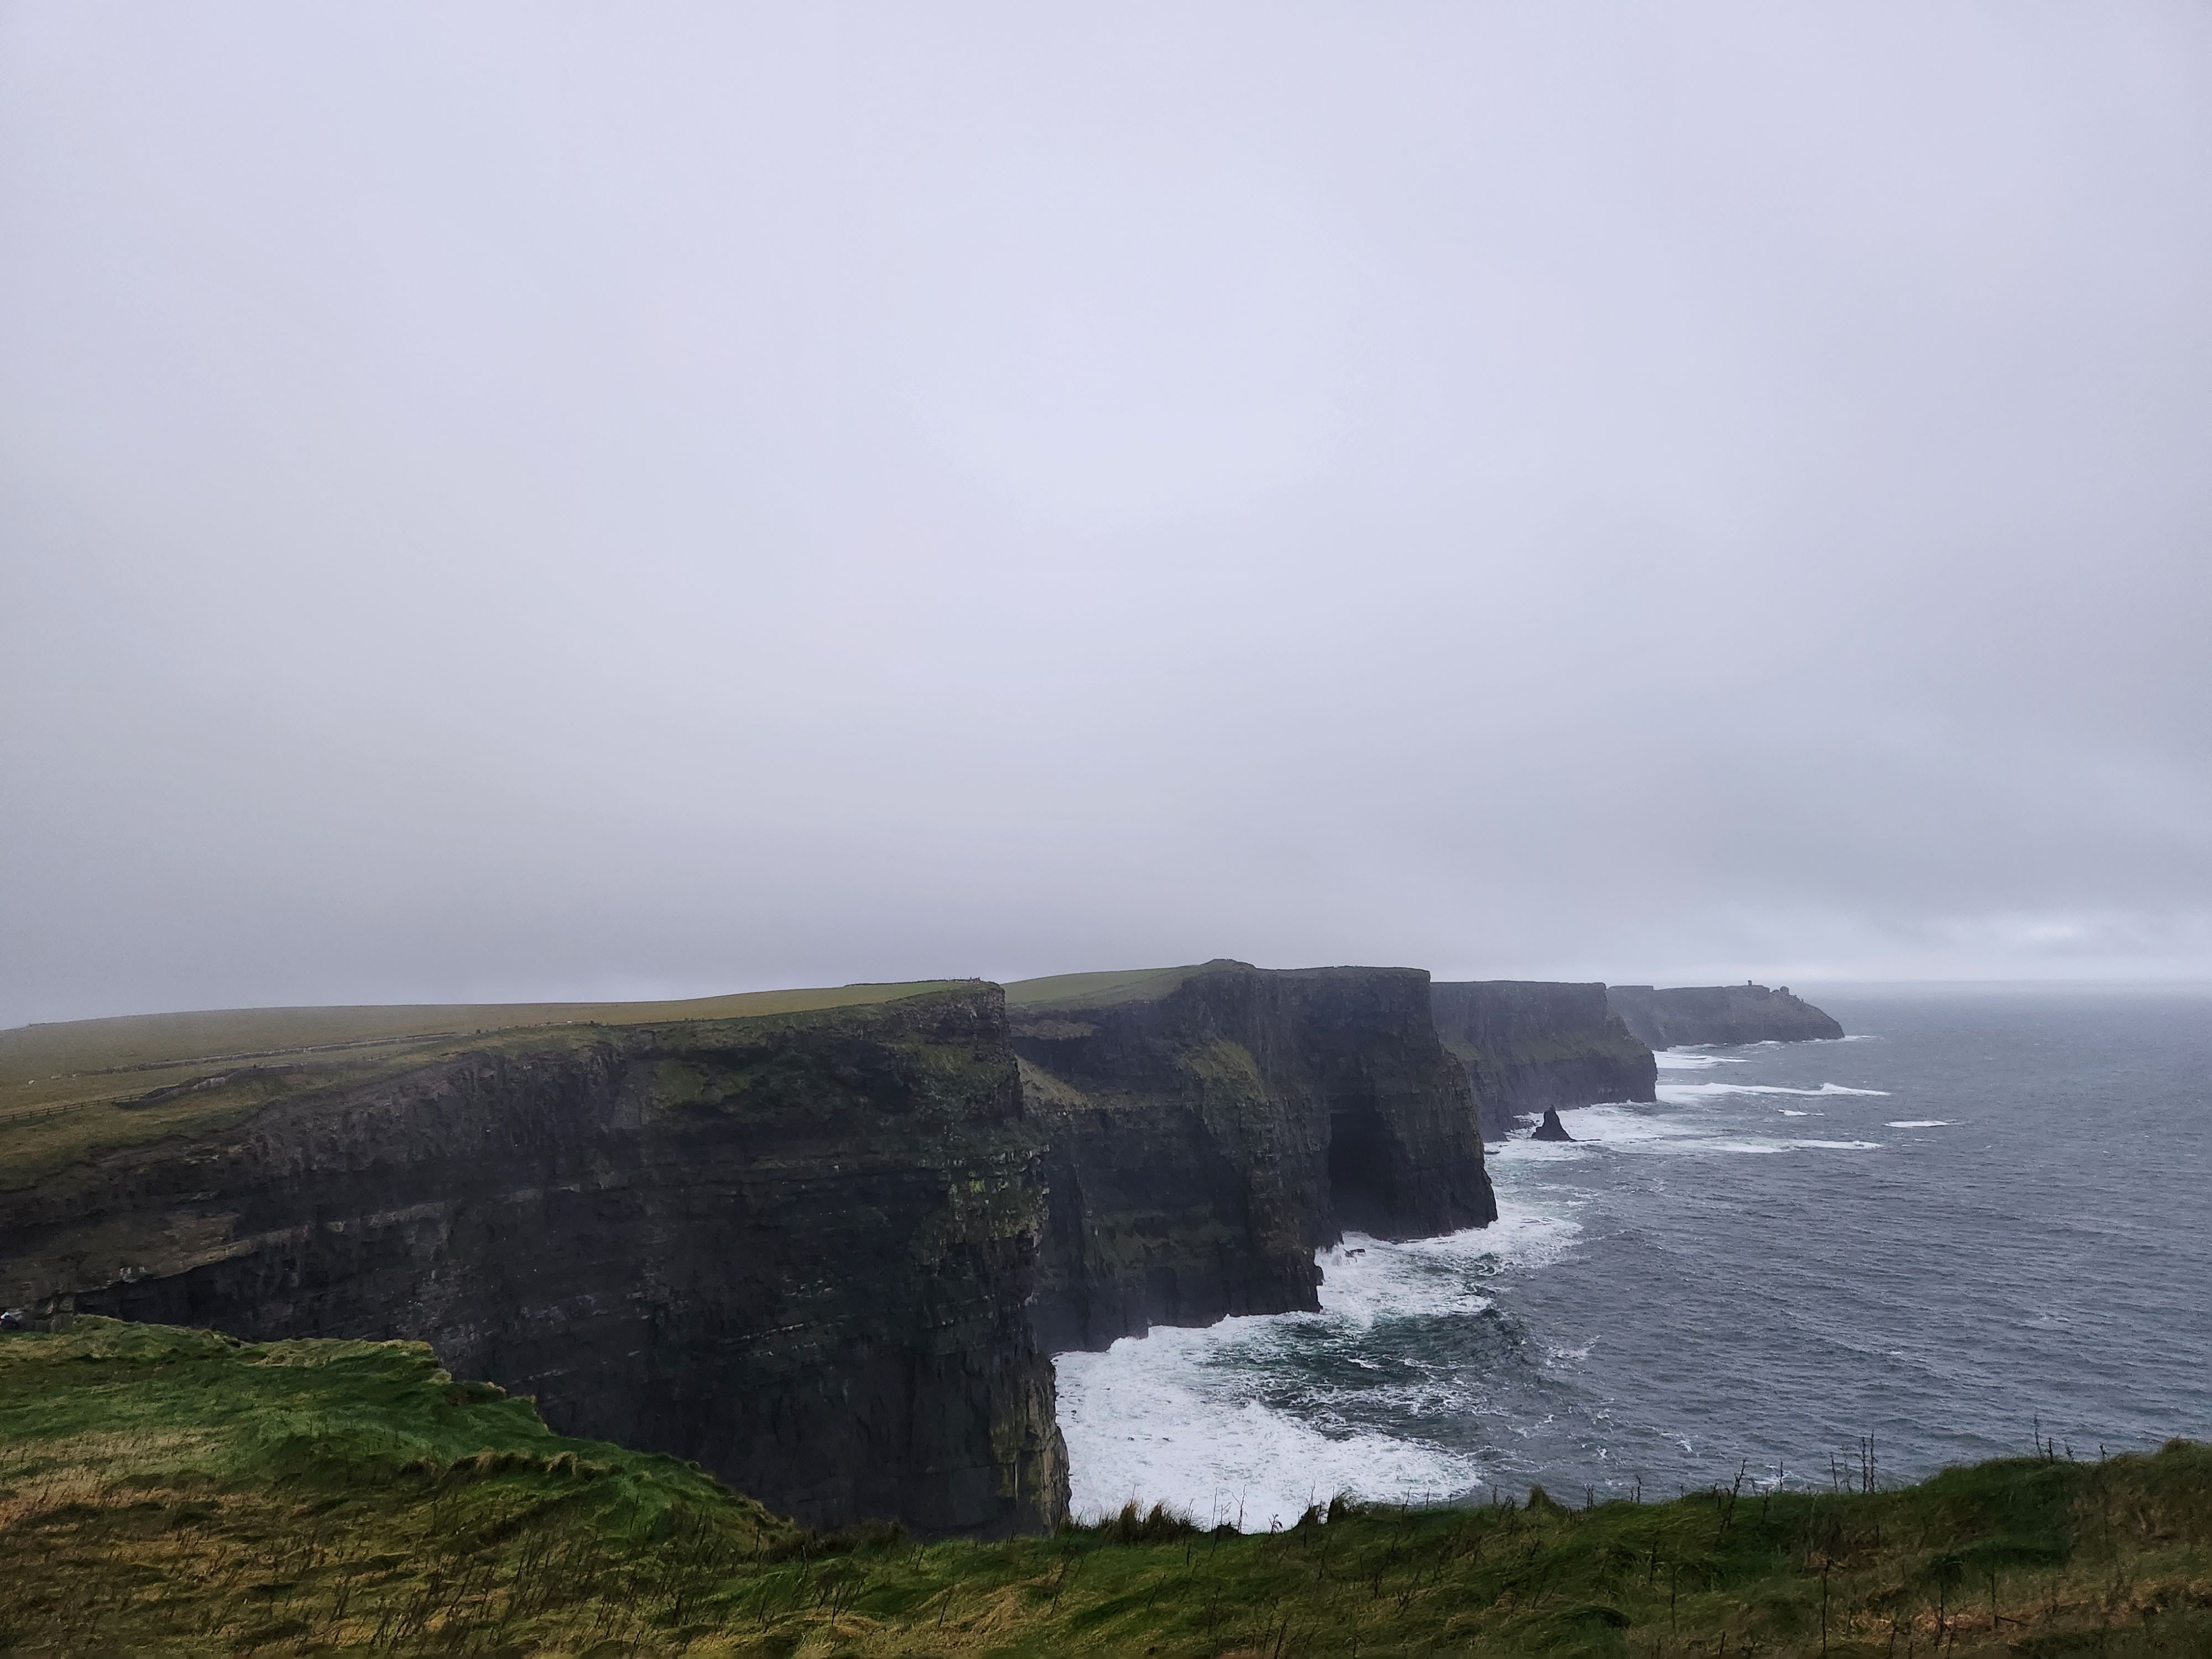 How to Choose Between Visiting the Cliffs of Moher vs. the Slieve League Cliffs